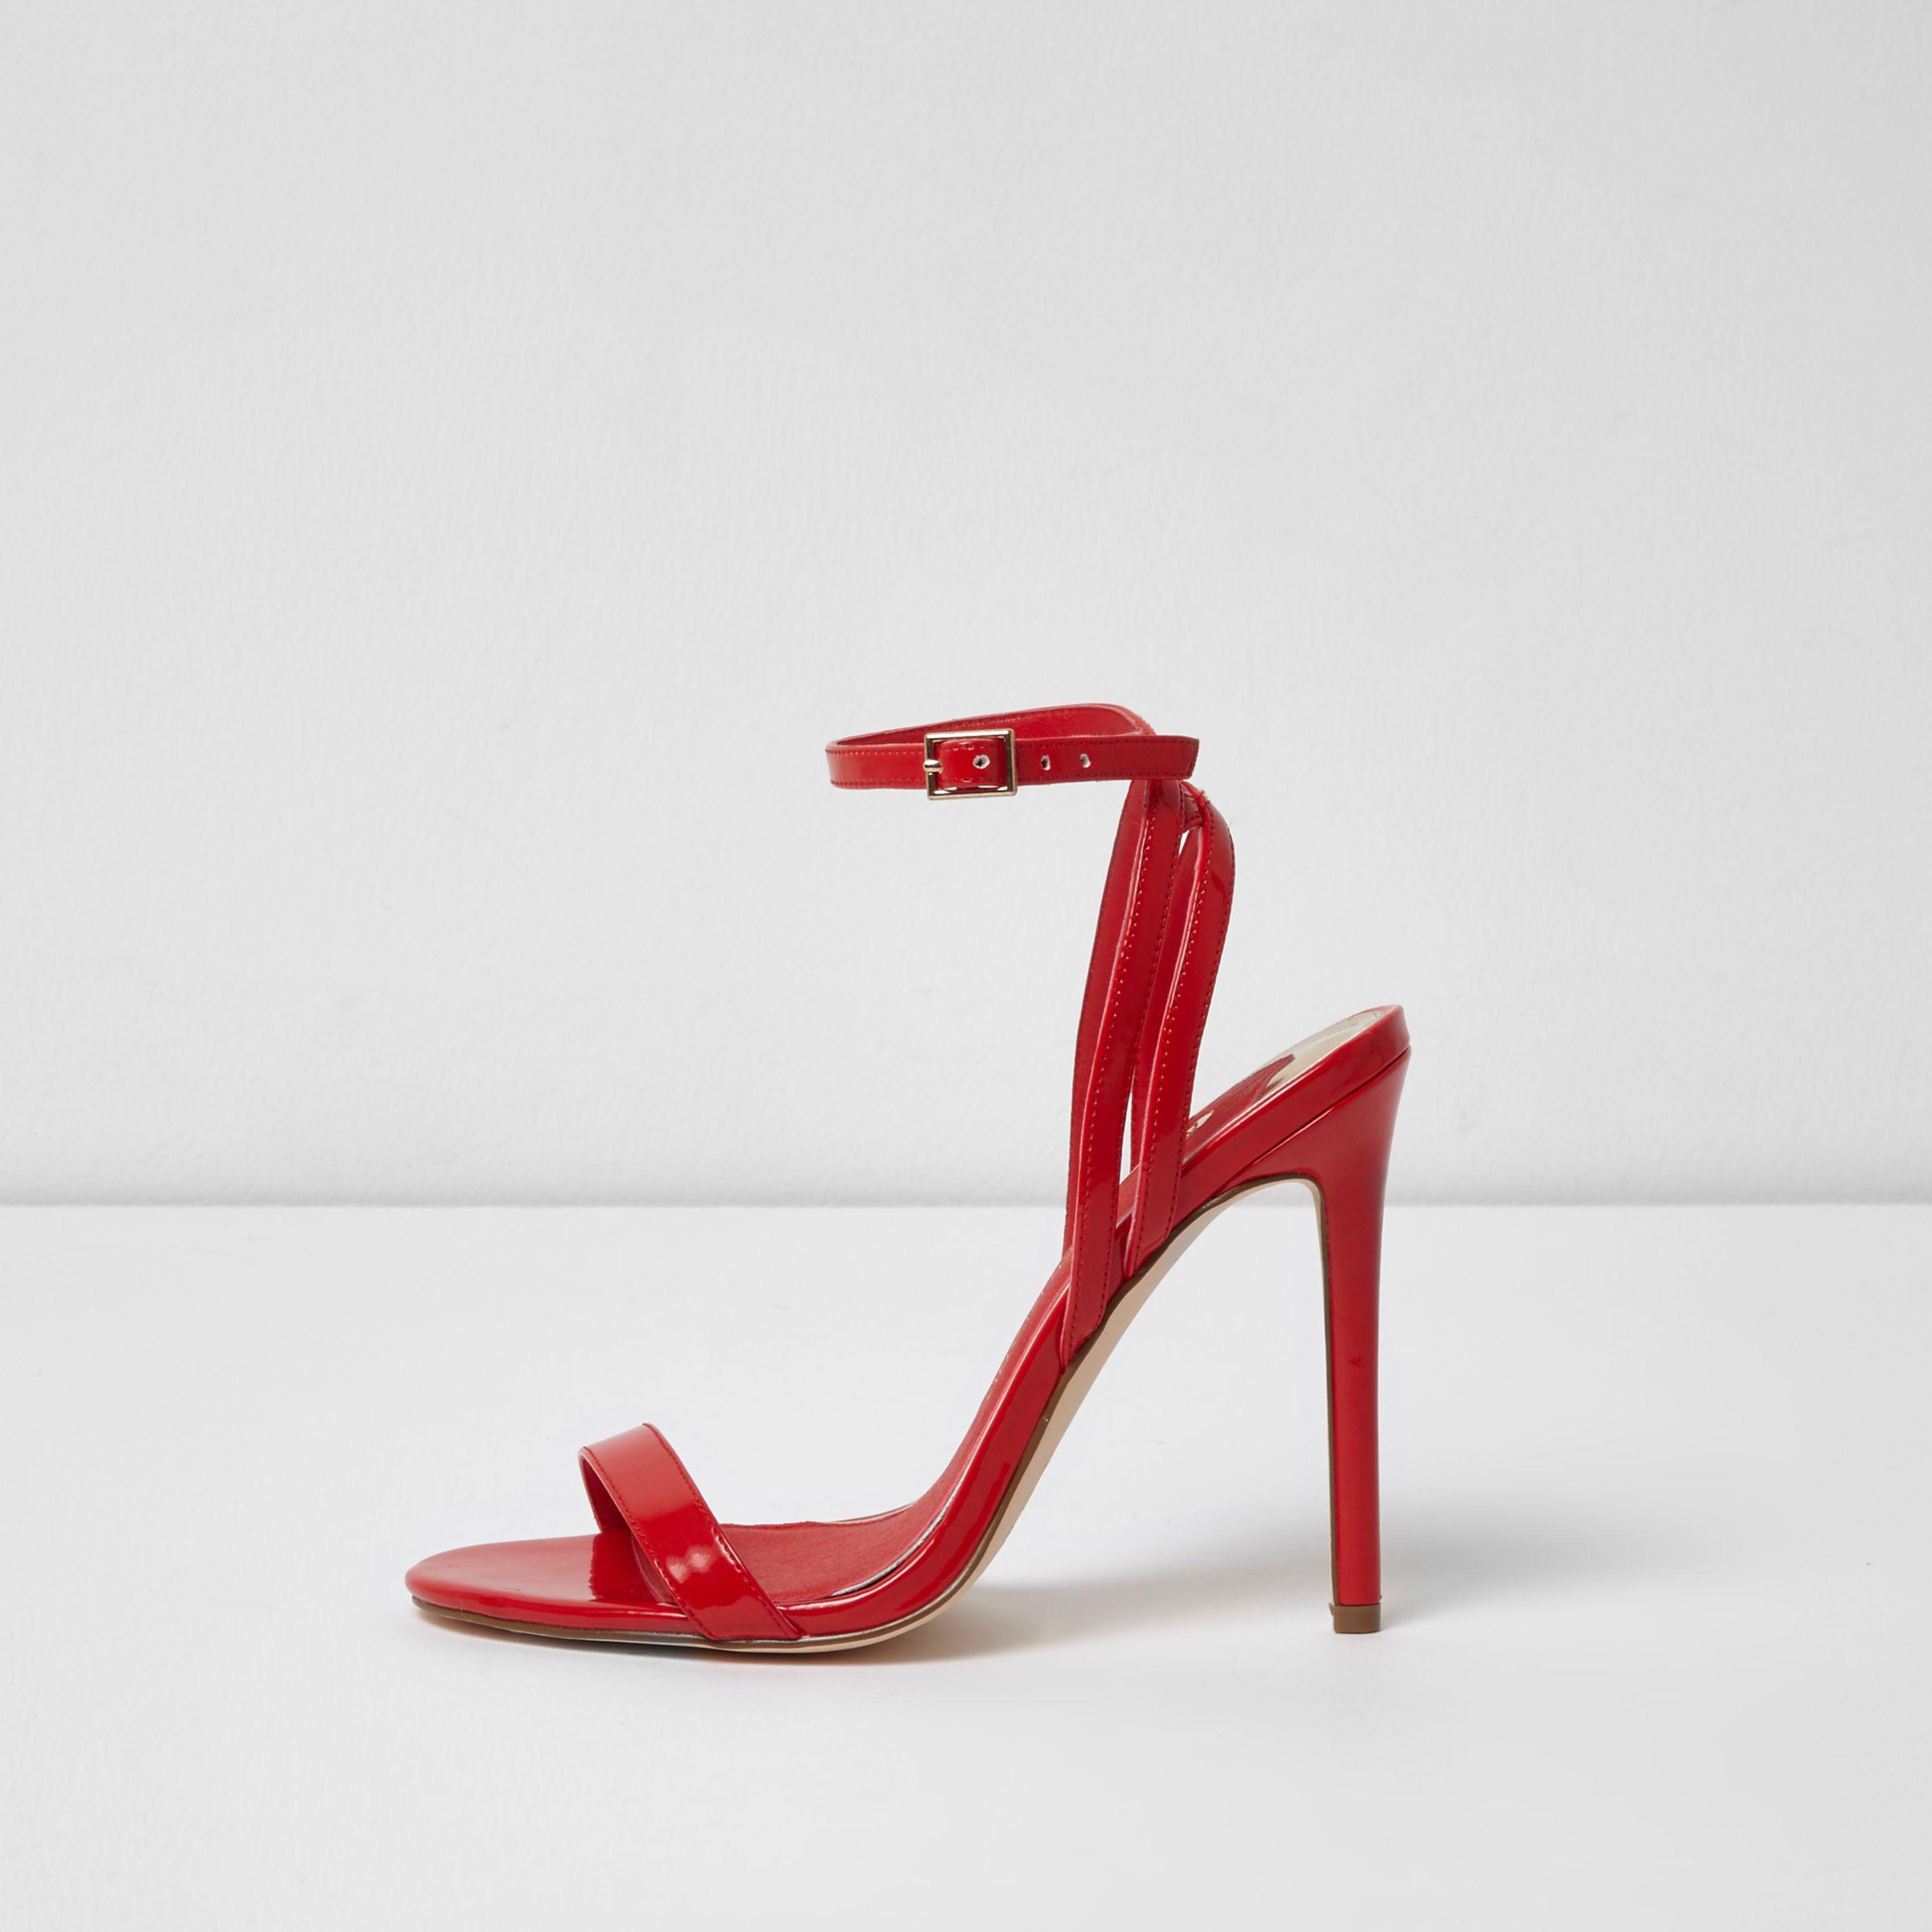 River Island Red Patent Barely There Sandals - Lyst